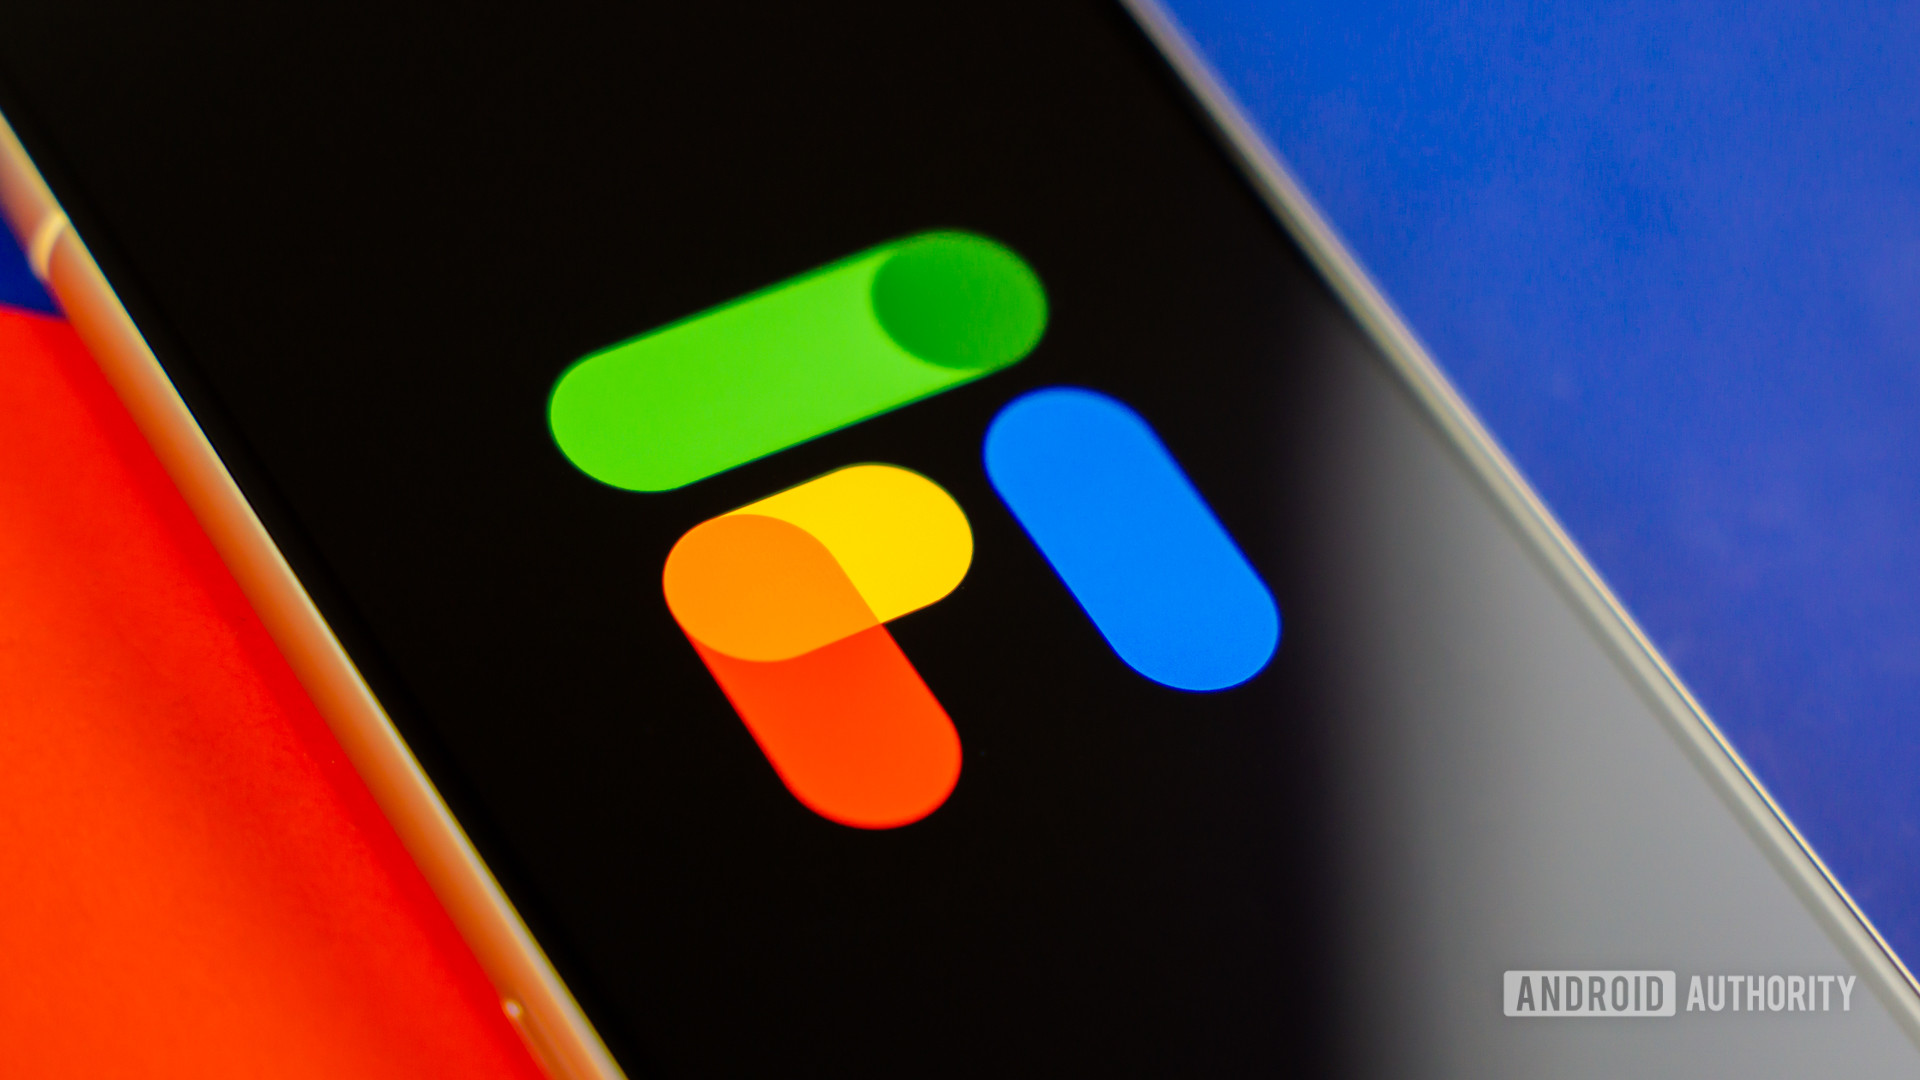 Stock photo of Google Fi logo on phone with colorful background 8